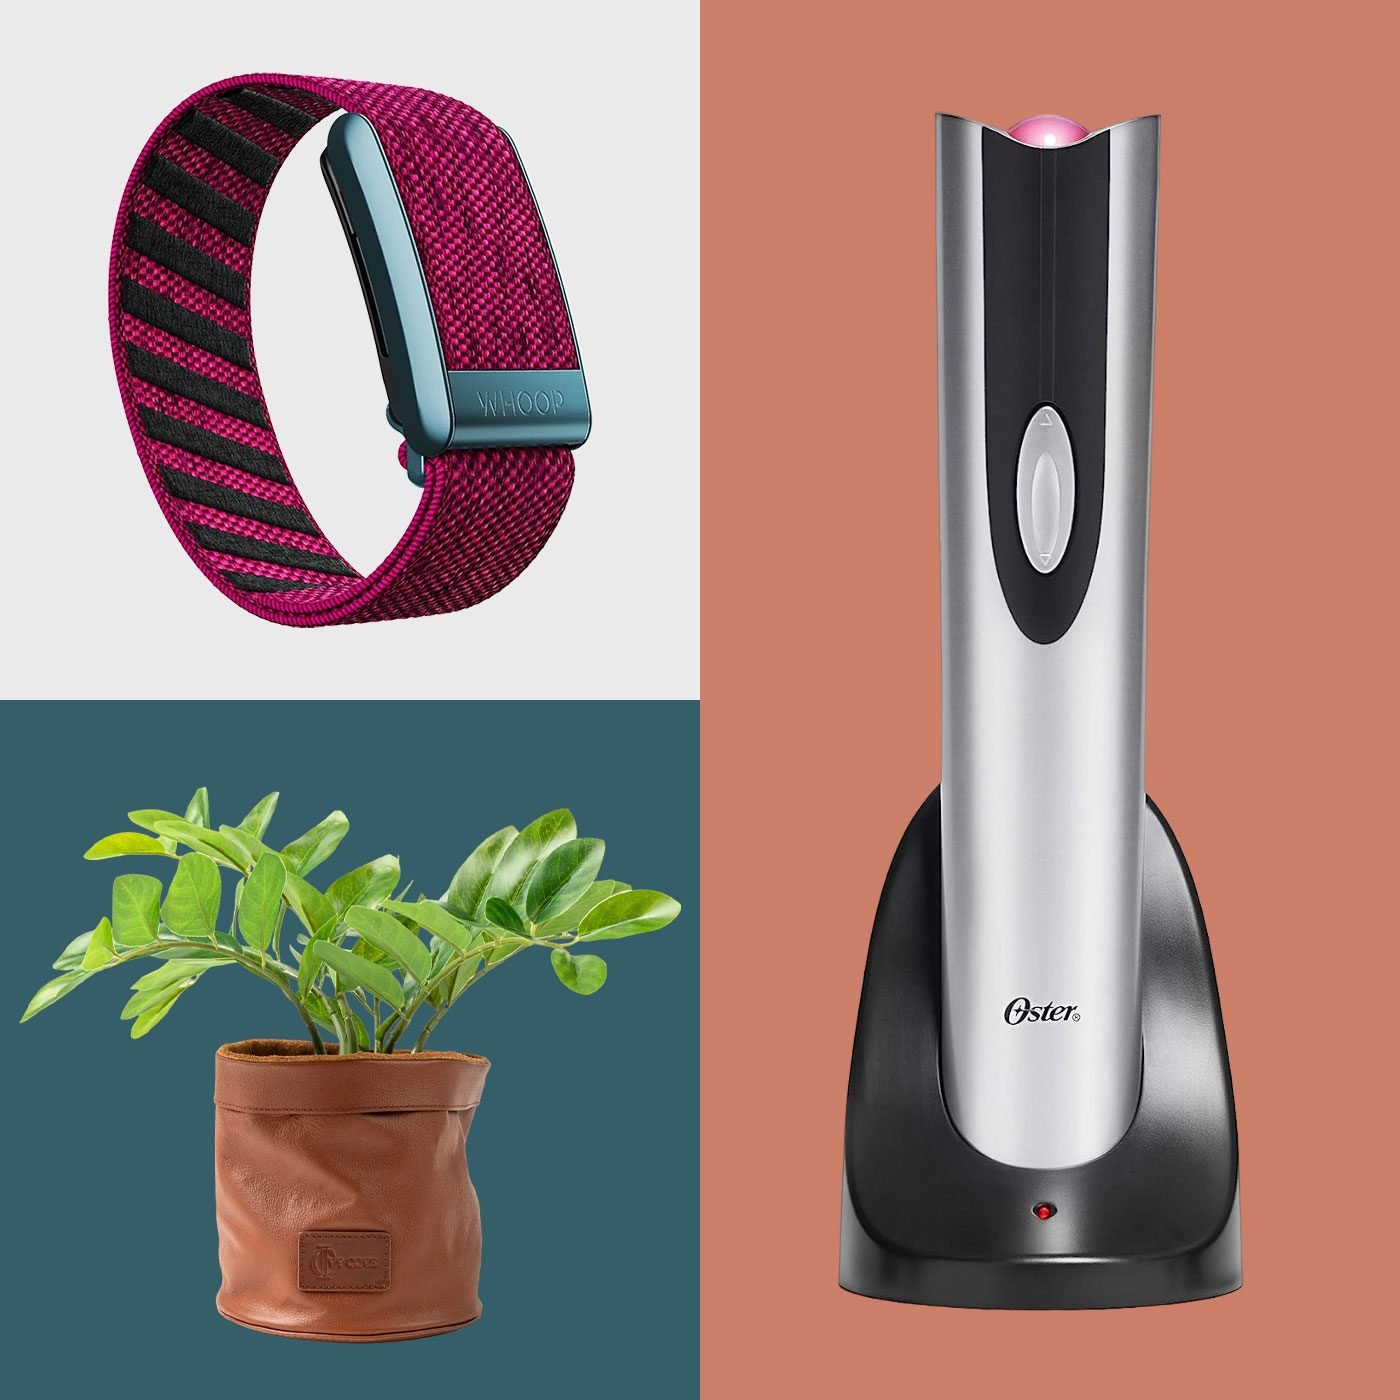 25 Clever Health And Fitness Gifts That Are Actually Useful